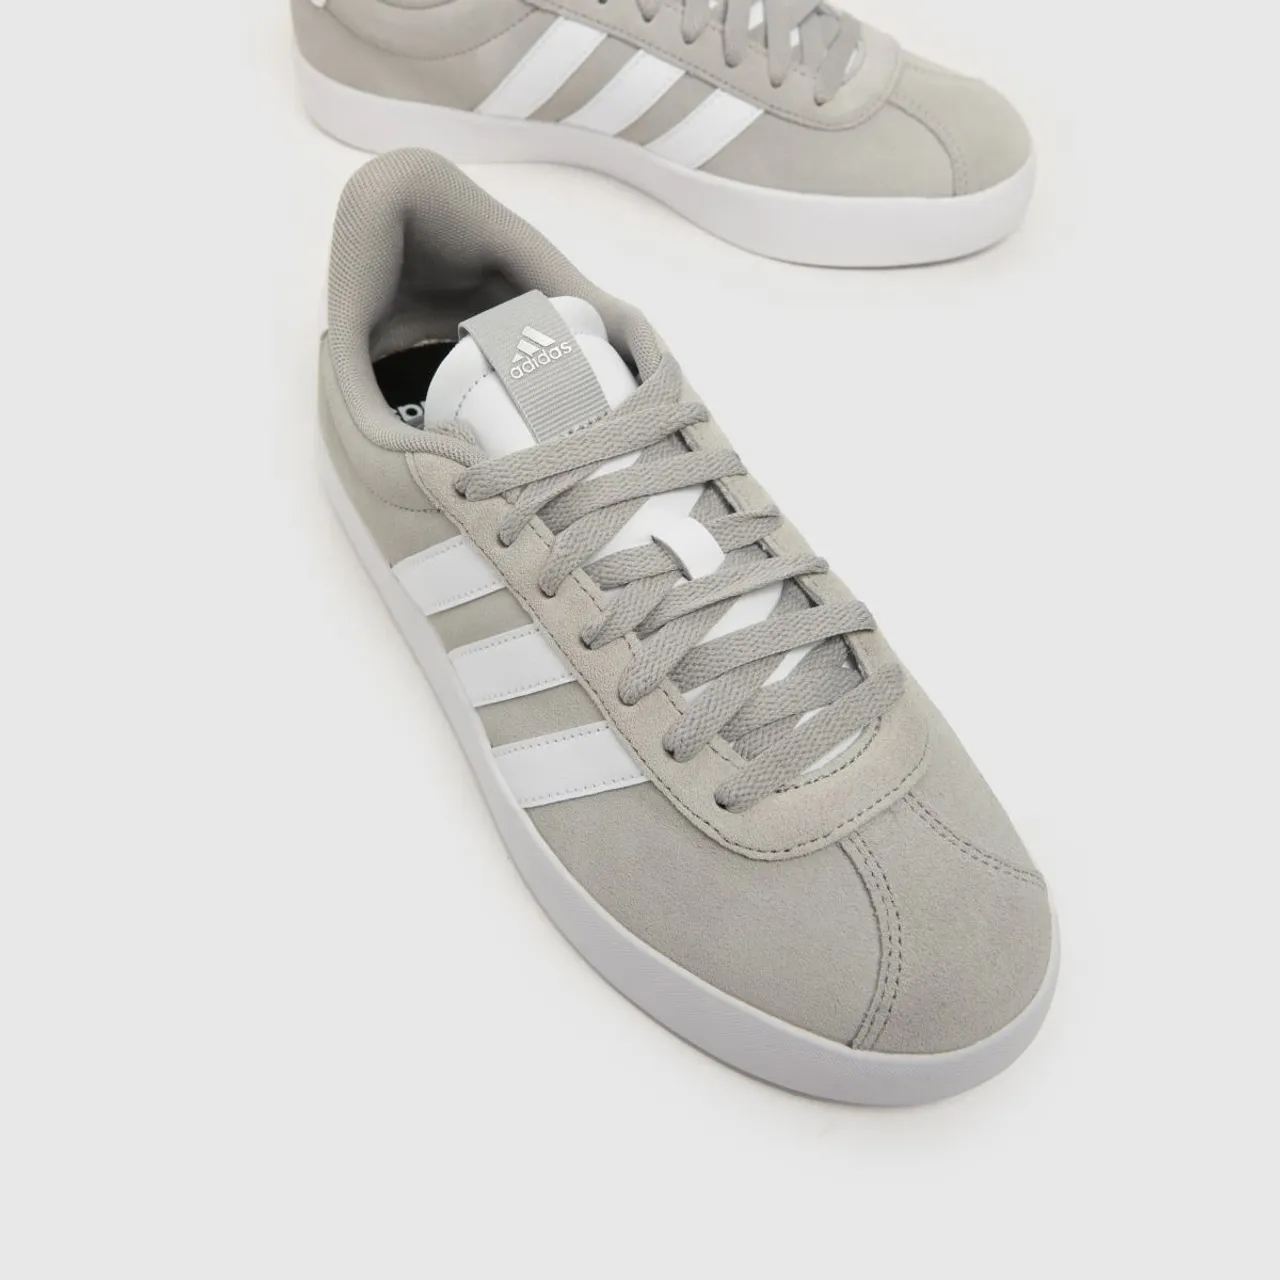 Adidas Vl Court 3.0 Trainers In Light Grey